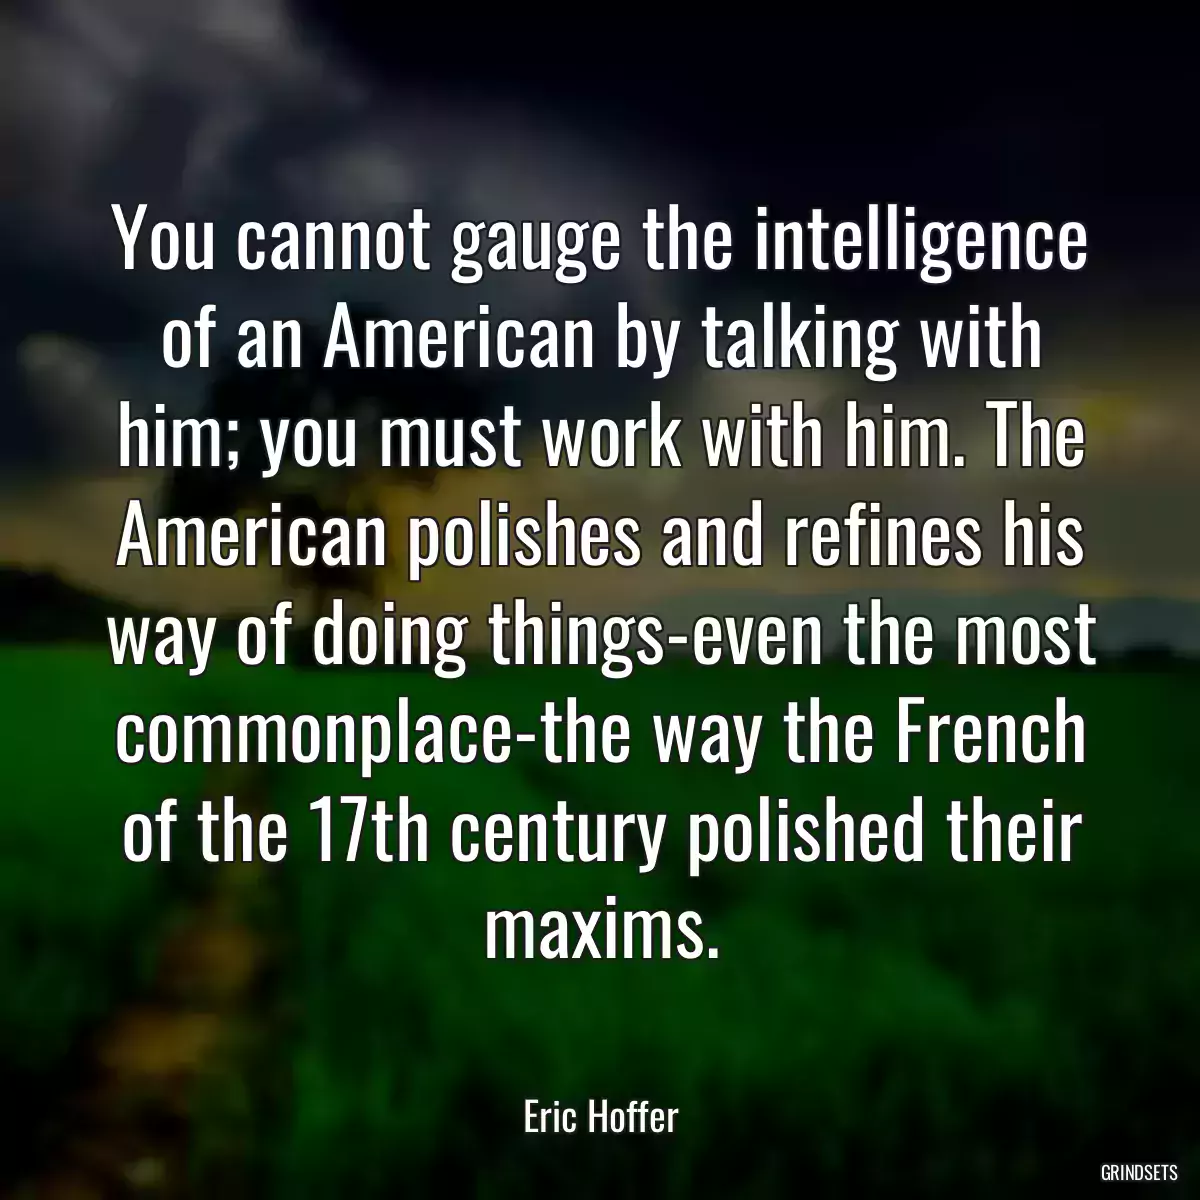 You cannot gauge the intelligence of an American by talking with him; you must work with him. The American polishes and refines his way of doing things-even the most commonplace-the way the French of the 17th century polished their maxims.